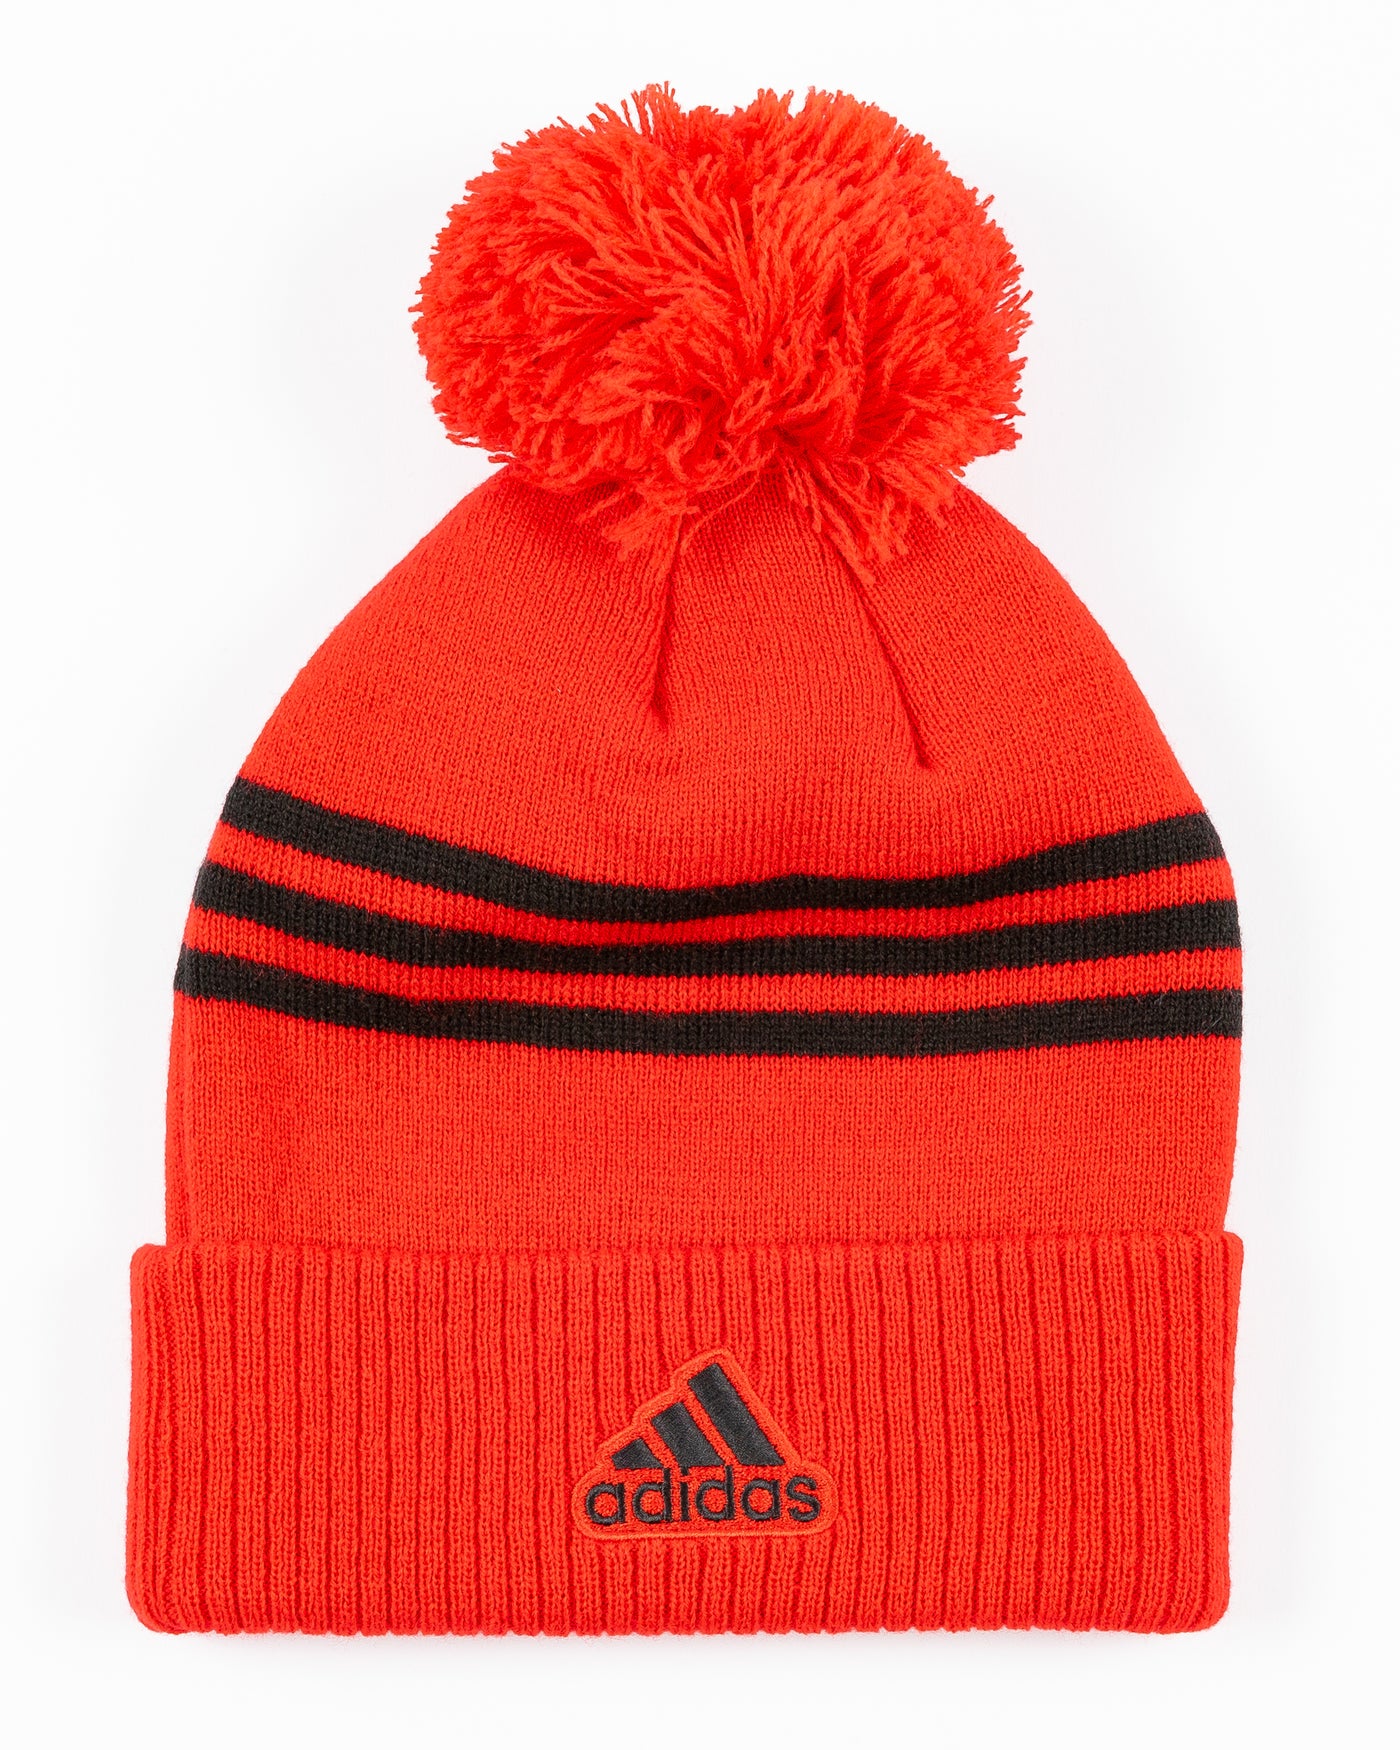 red adidas knit hat with pom with Chicago Blackhawks primary logo embroidered on cuff - back lay flat